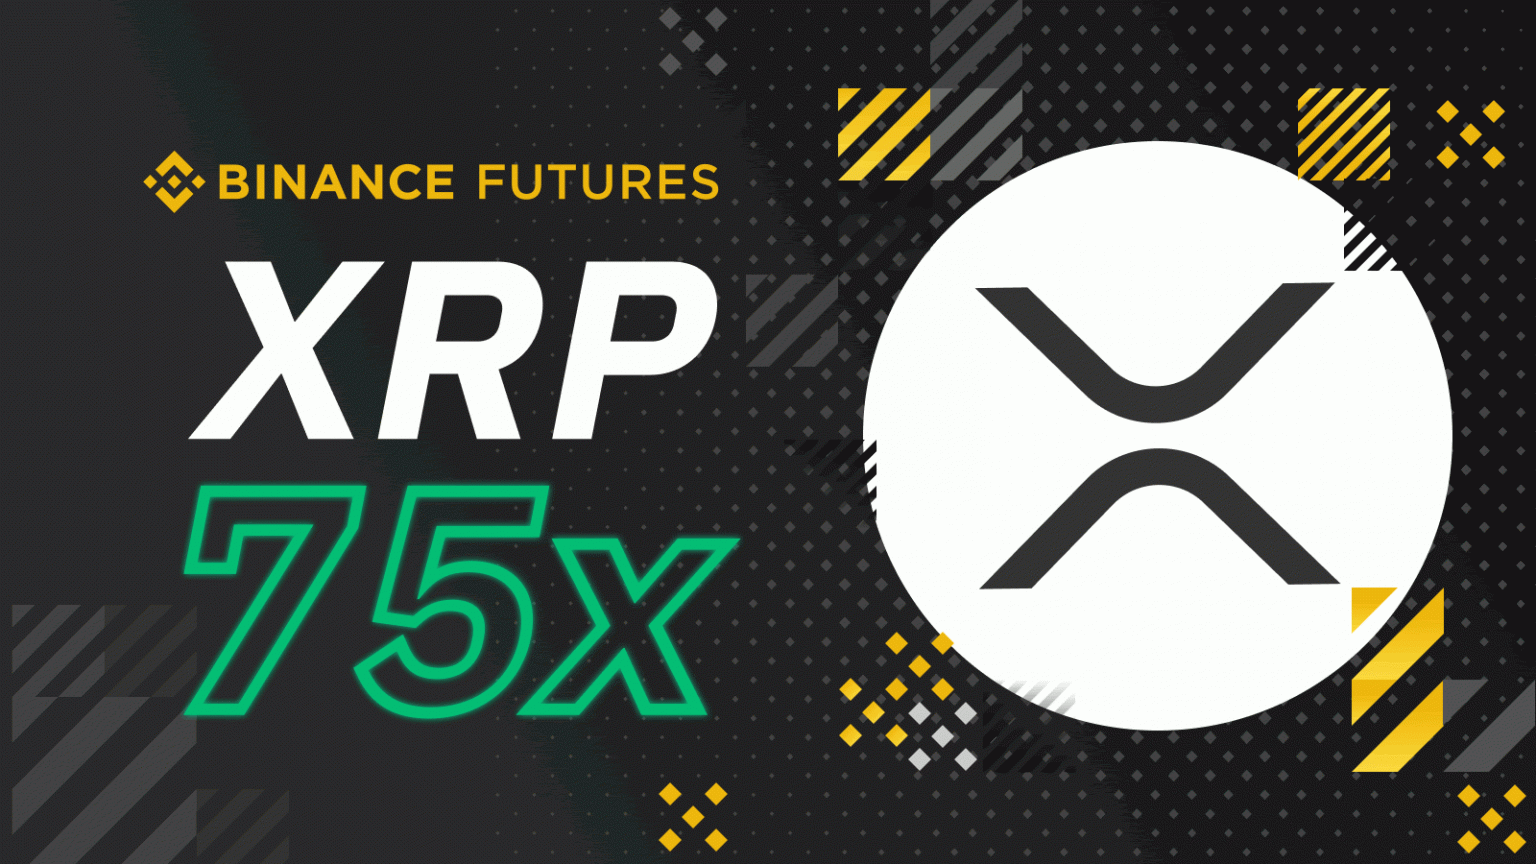 Binance: future XRP/USDT with leverage of up to 75 more ...